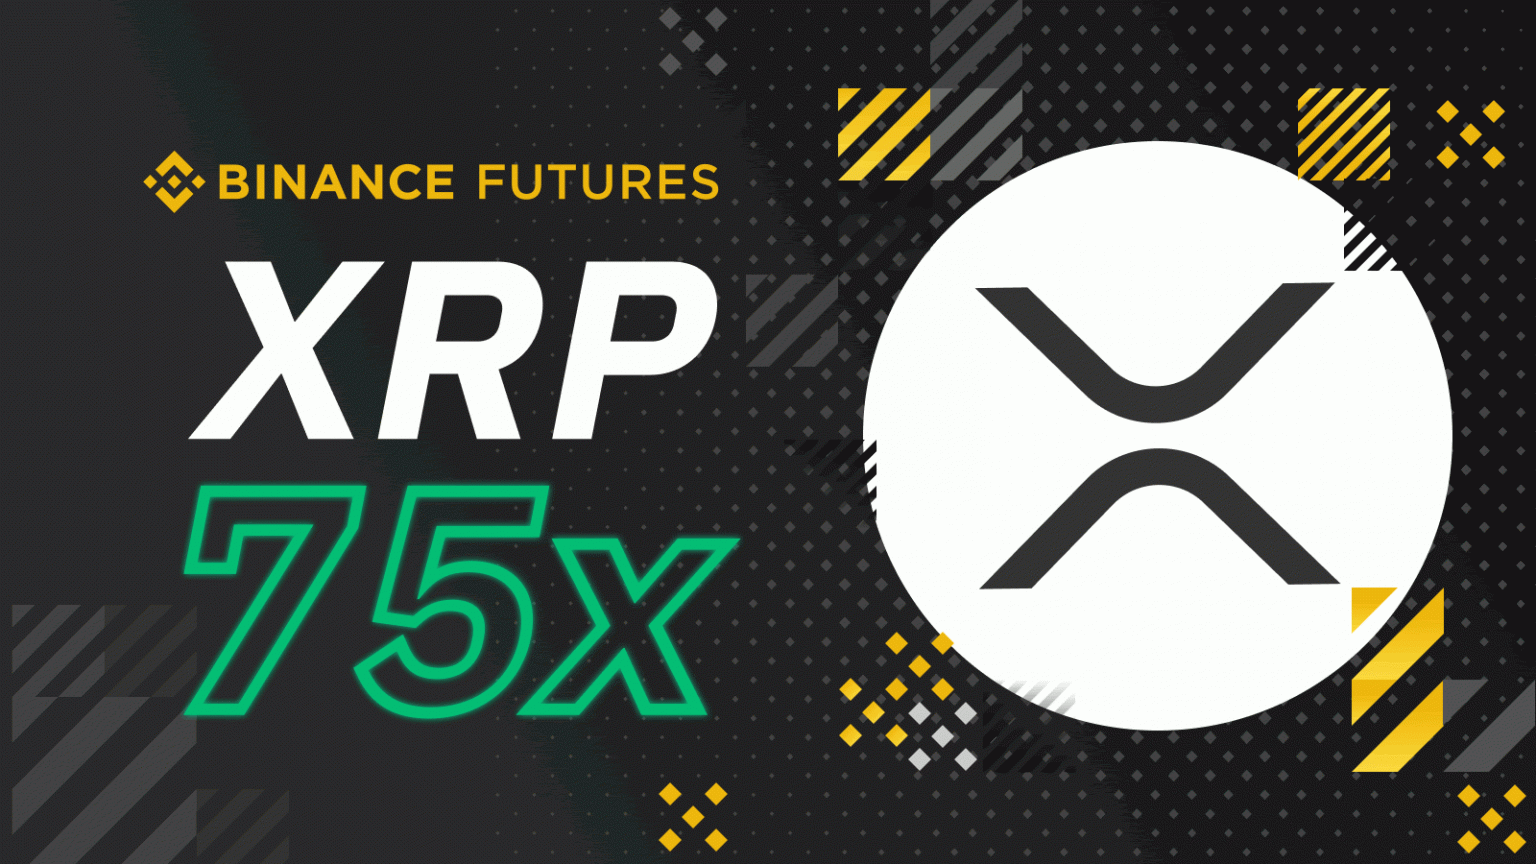 Binance: future XRP/USDT with leverage of up to 75 more ...